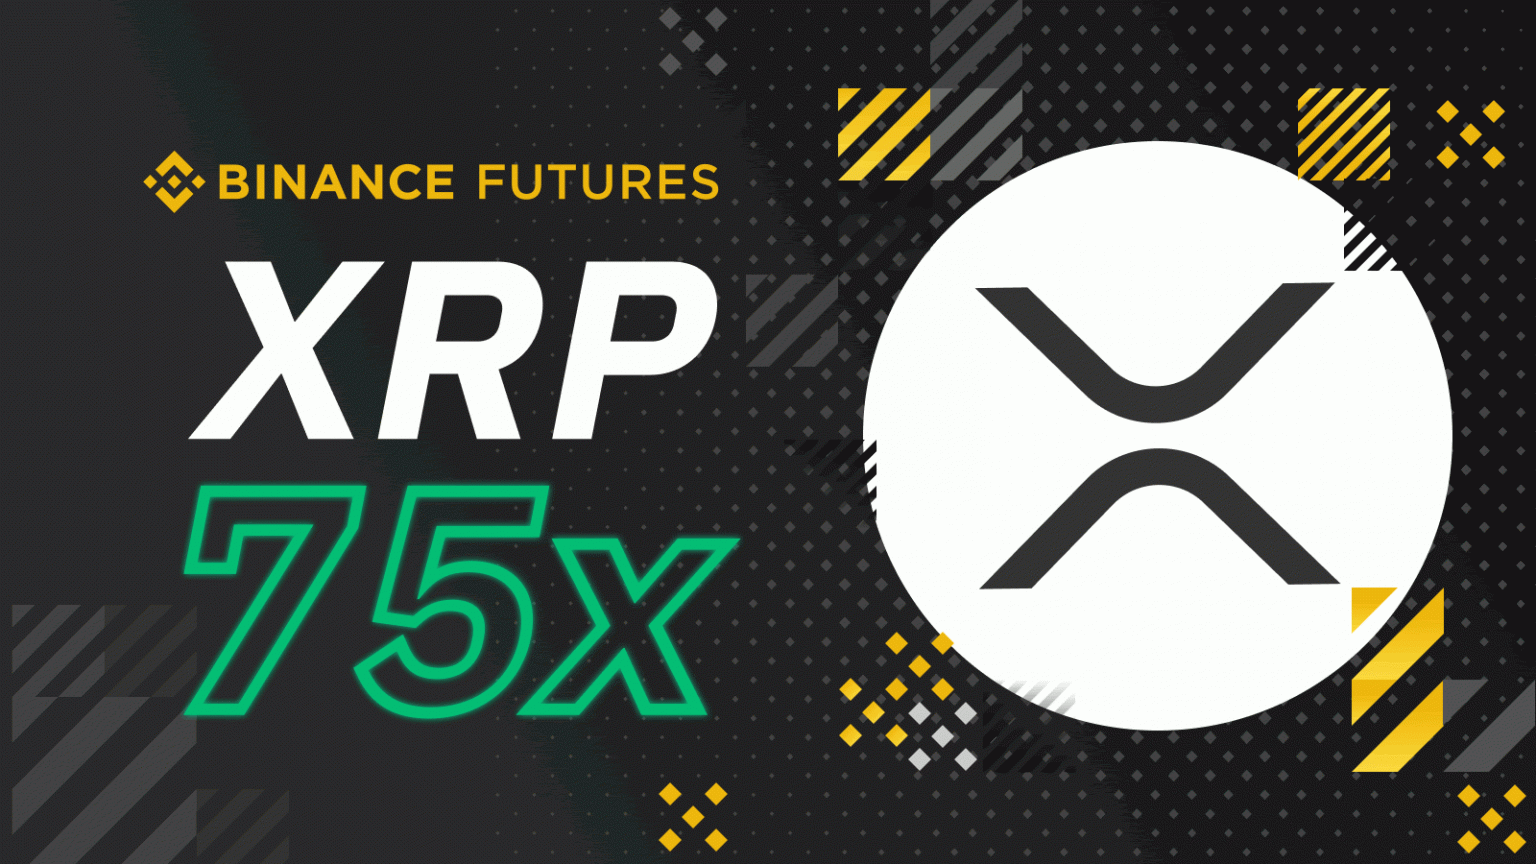 Binance: future XRP/USDT with leverage of up to 75 more ...